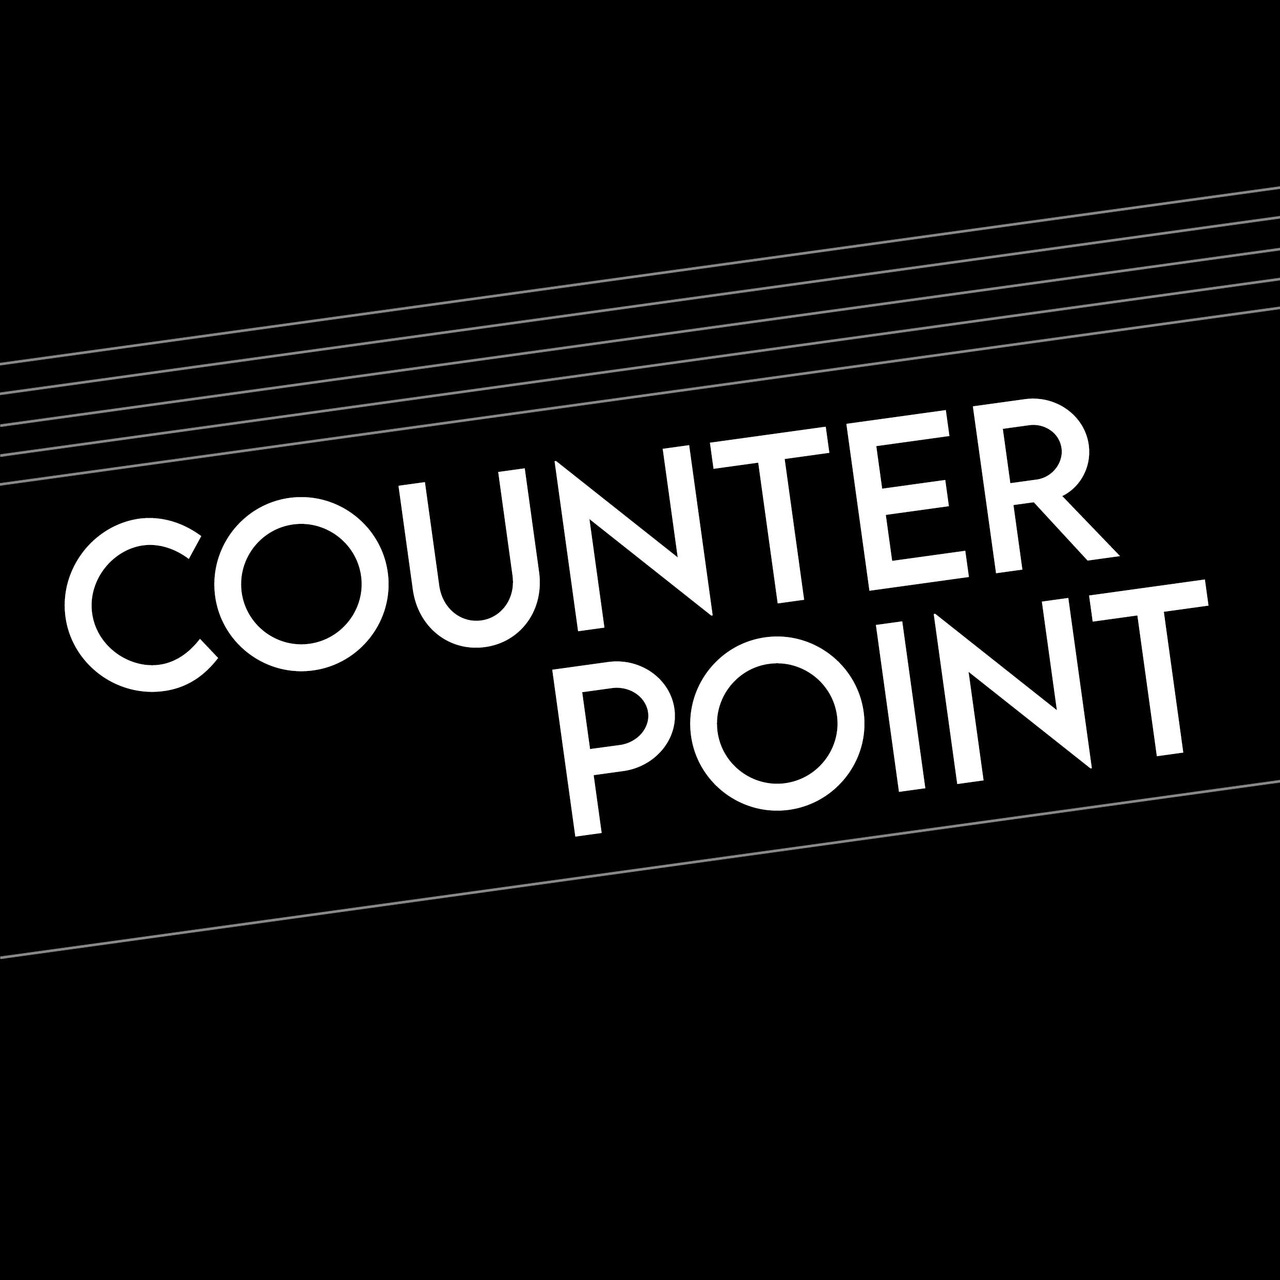 Artwork for COUNTERPOINT by Adam Lenson